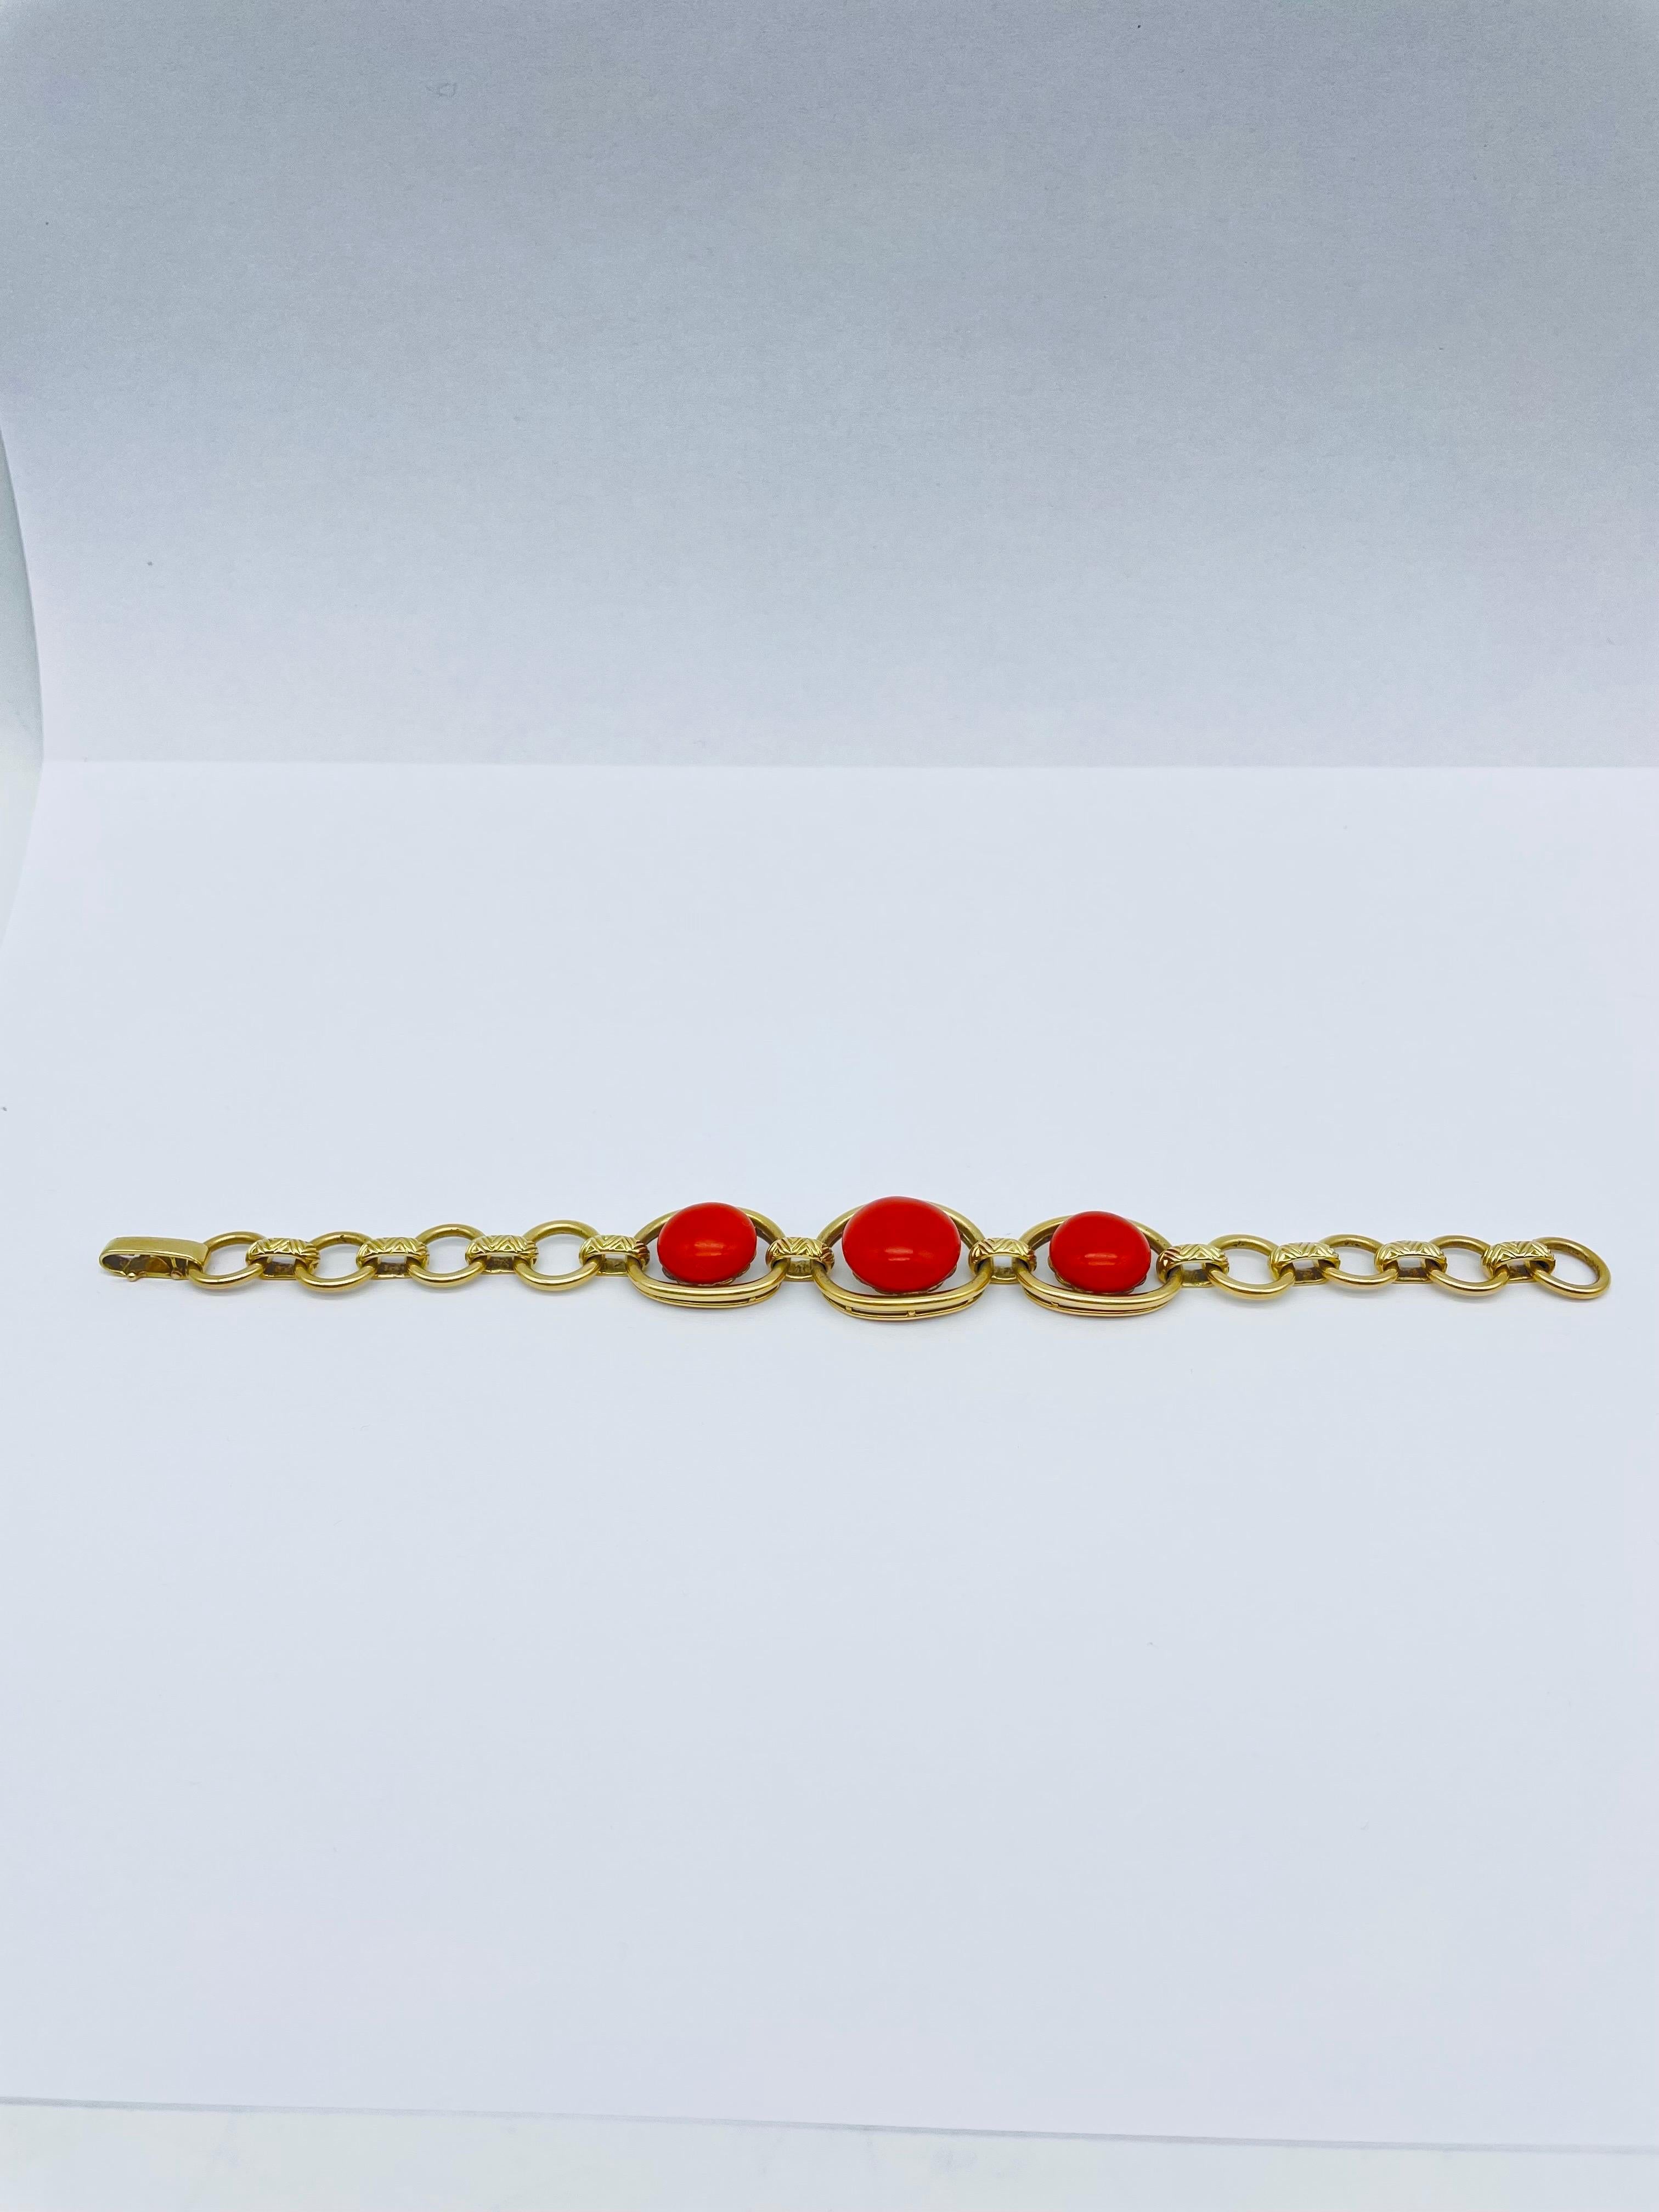 This exceptional bracelet is a true testament to the artistry and craftsmanship of fine jewelry making. Crafted from the finest 14K yellow gold, it is set with three large red coral cabochons, each one emanating a rich and vibrant hue. The cabochons